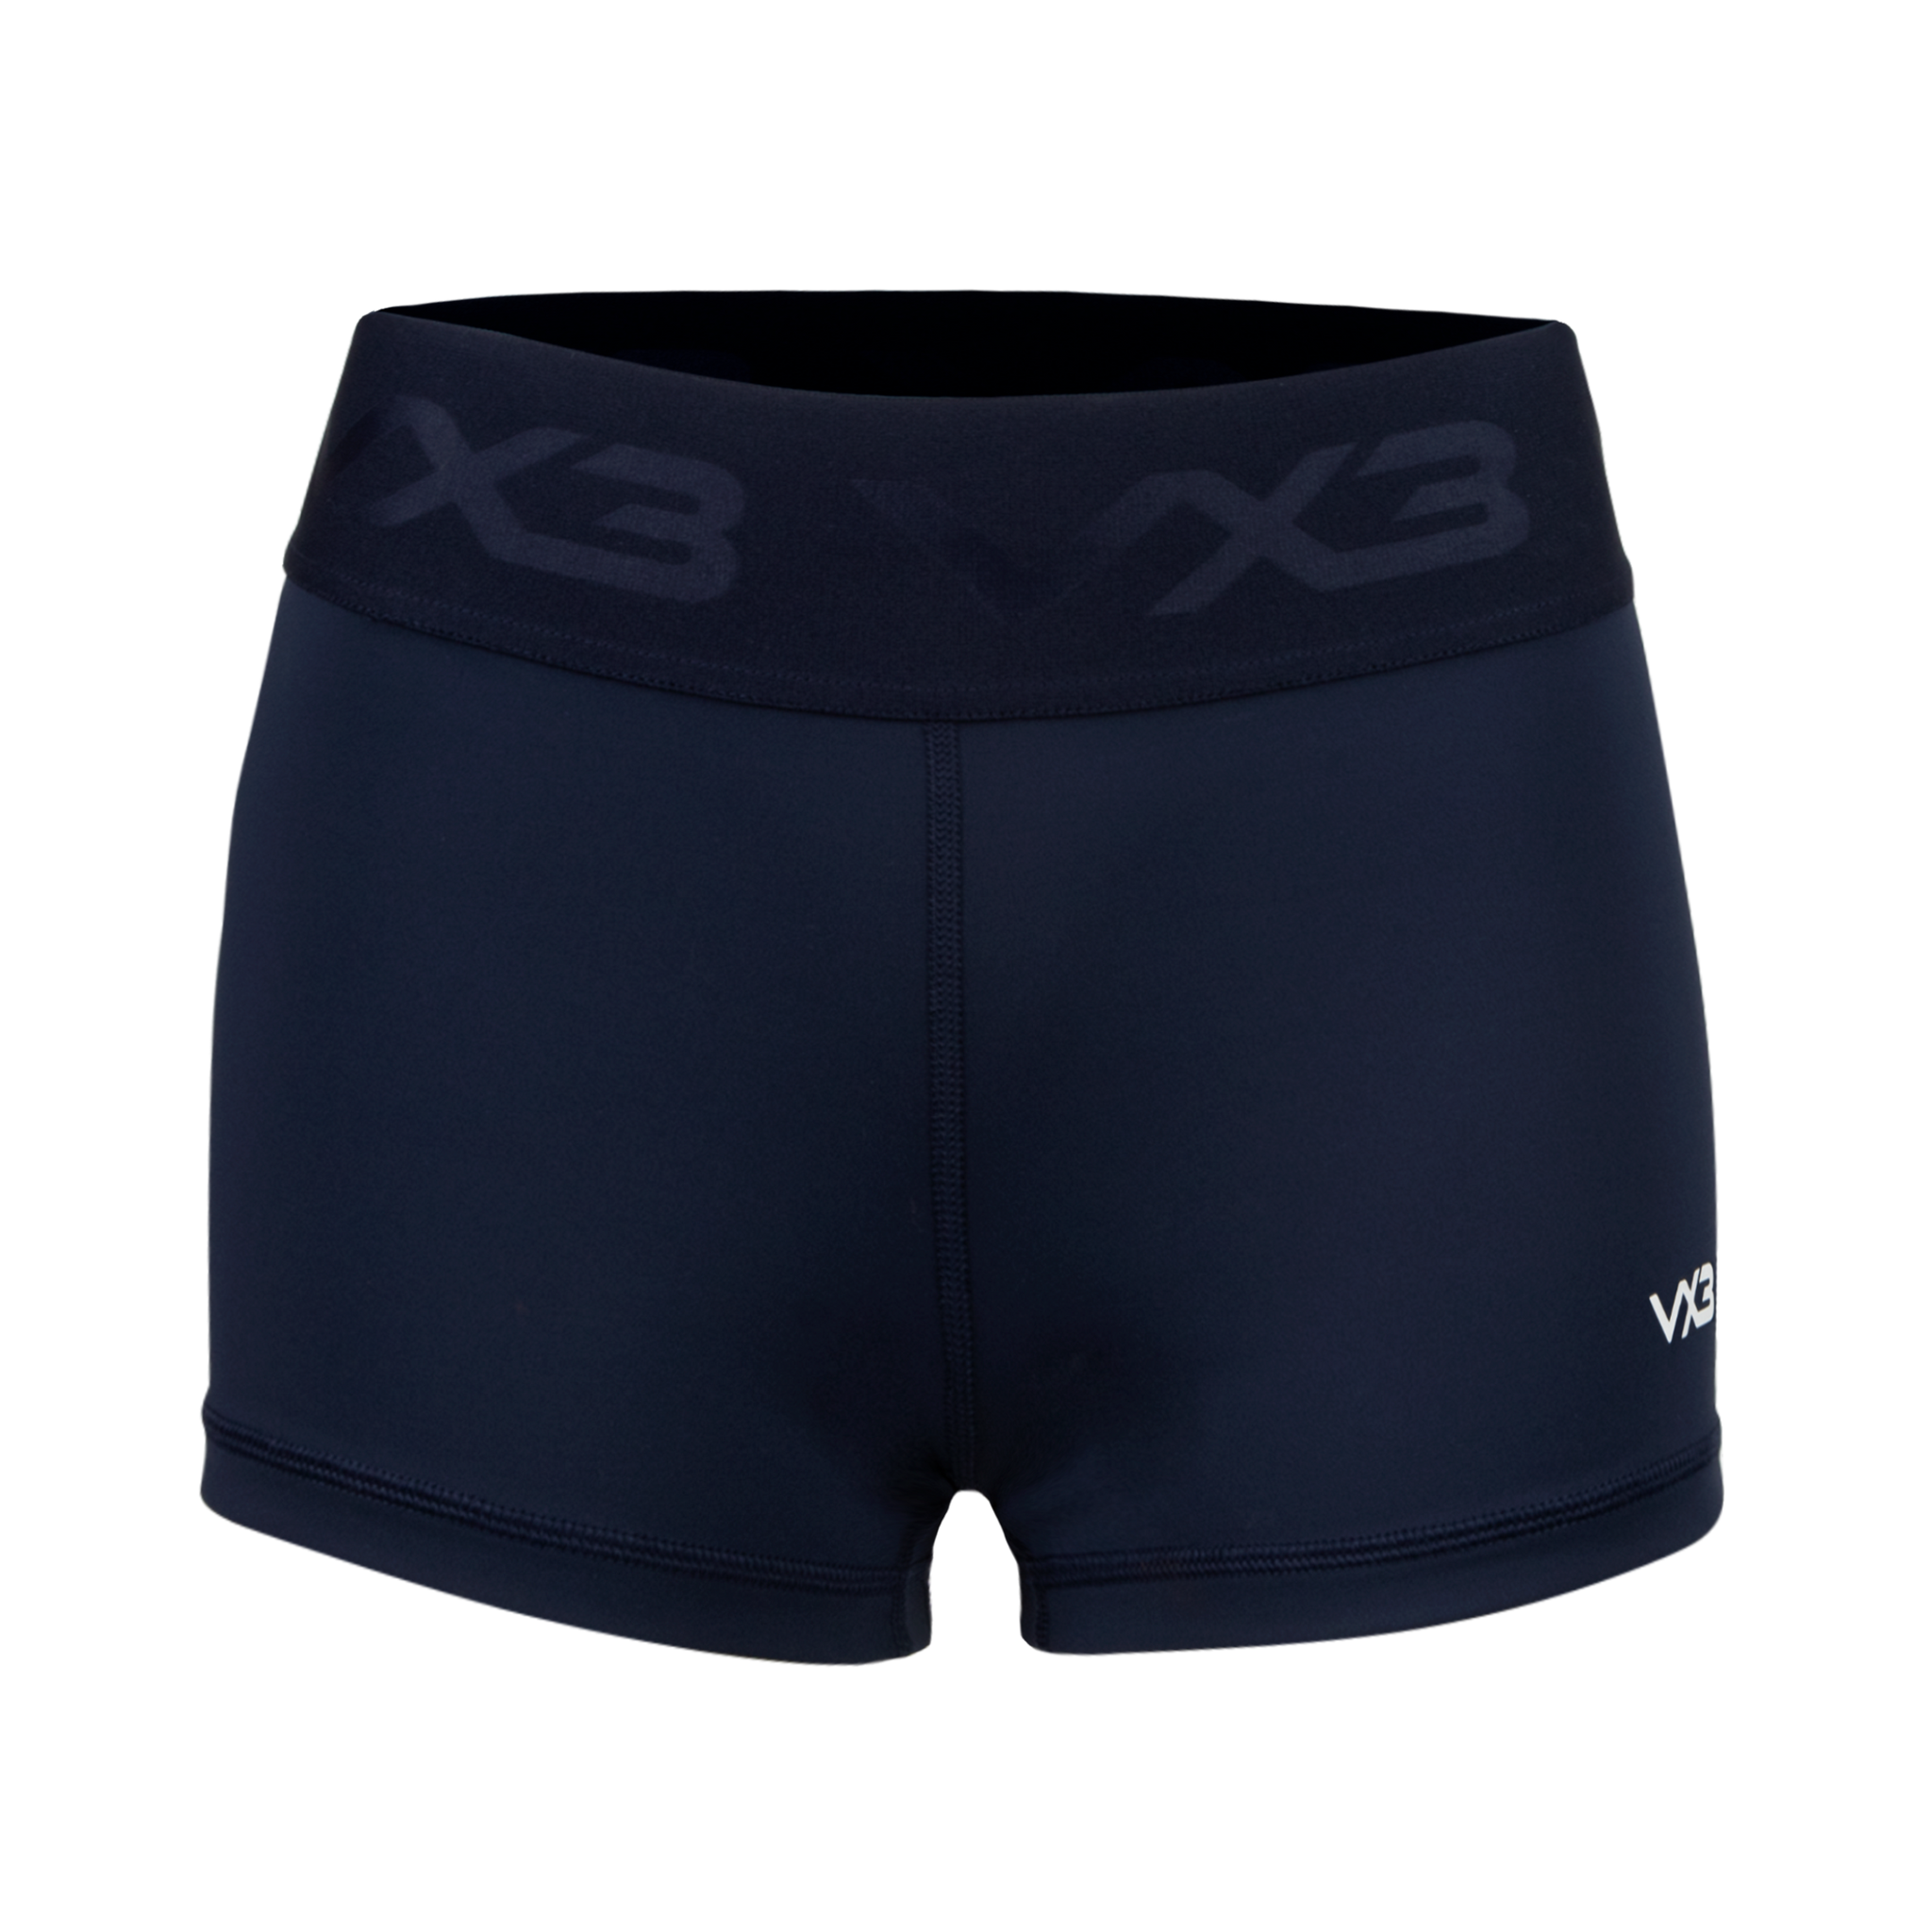 Booty shorts Navy Front View